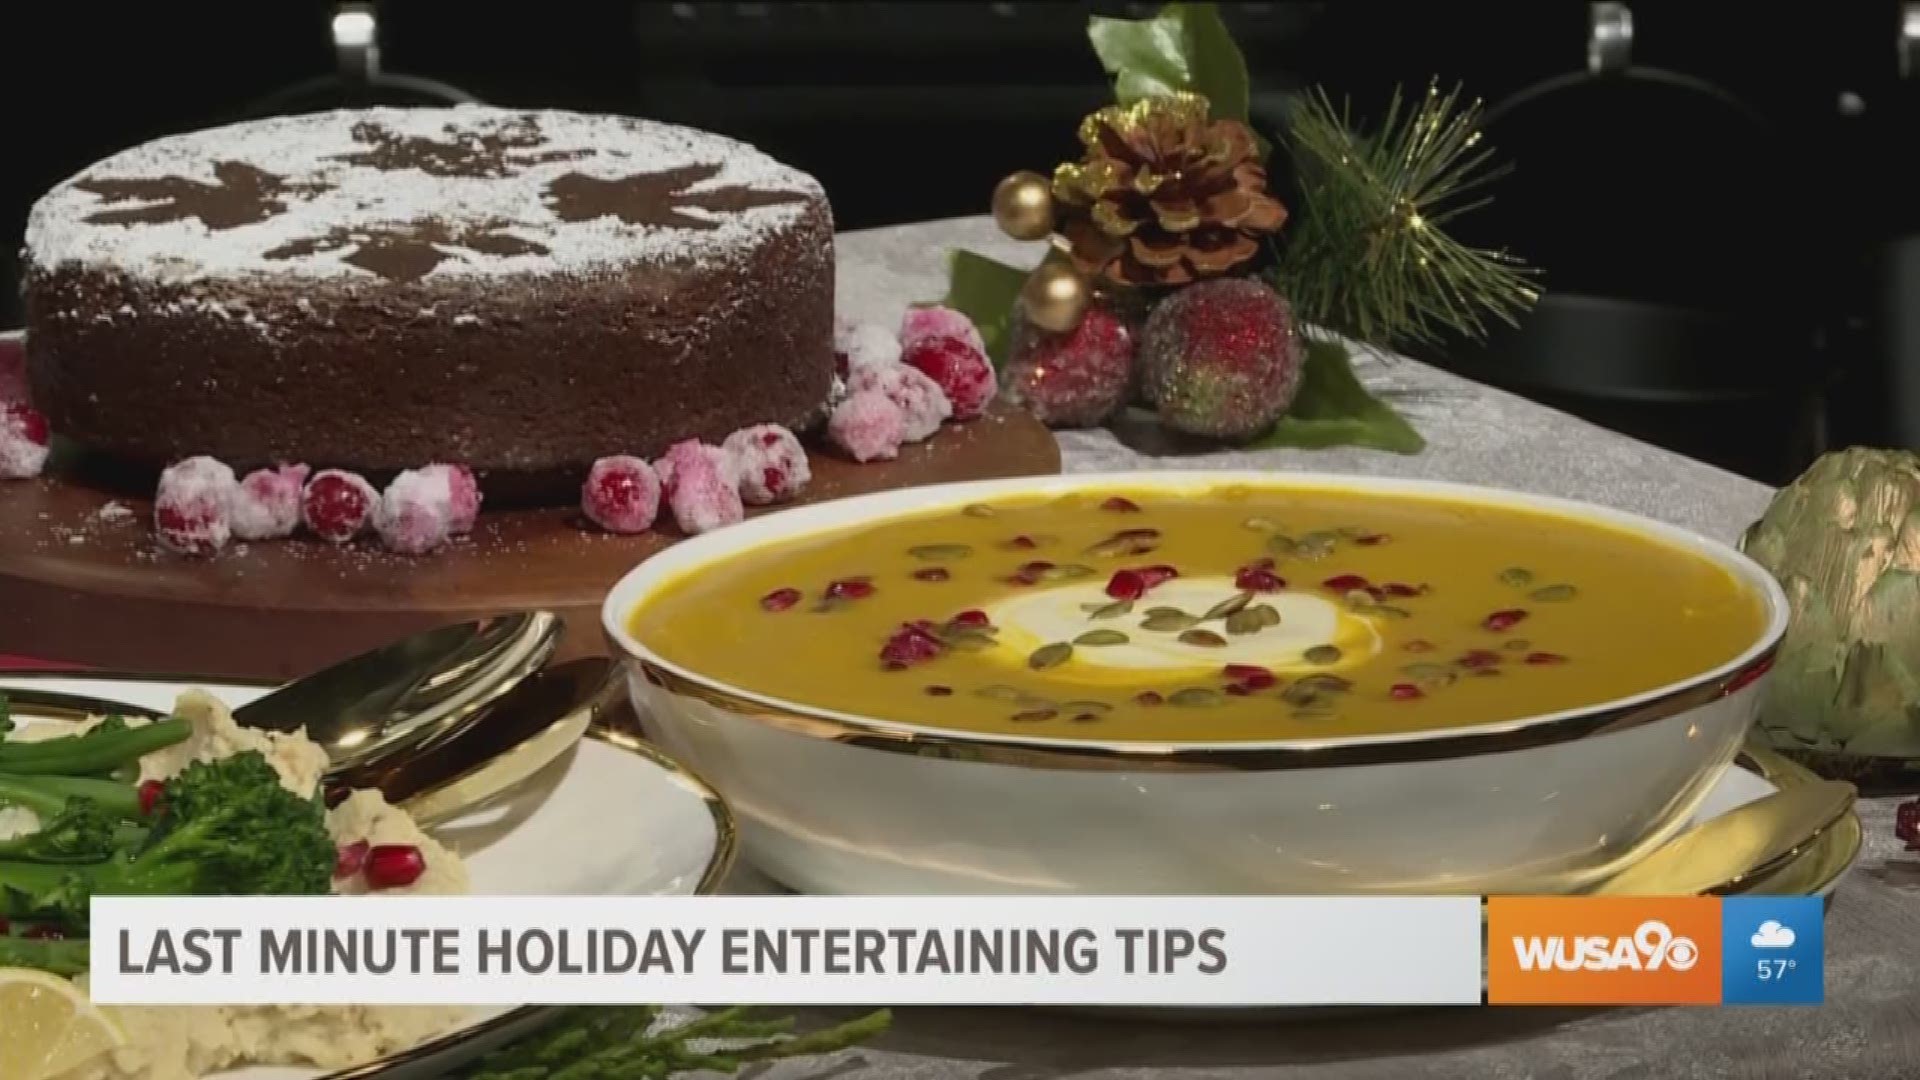 Celebrity chef George Duran is here to share tips to make sure you are prepared for anything this holiday season. This segment was sponsored by the DailyLounge.com.